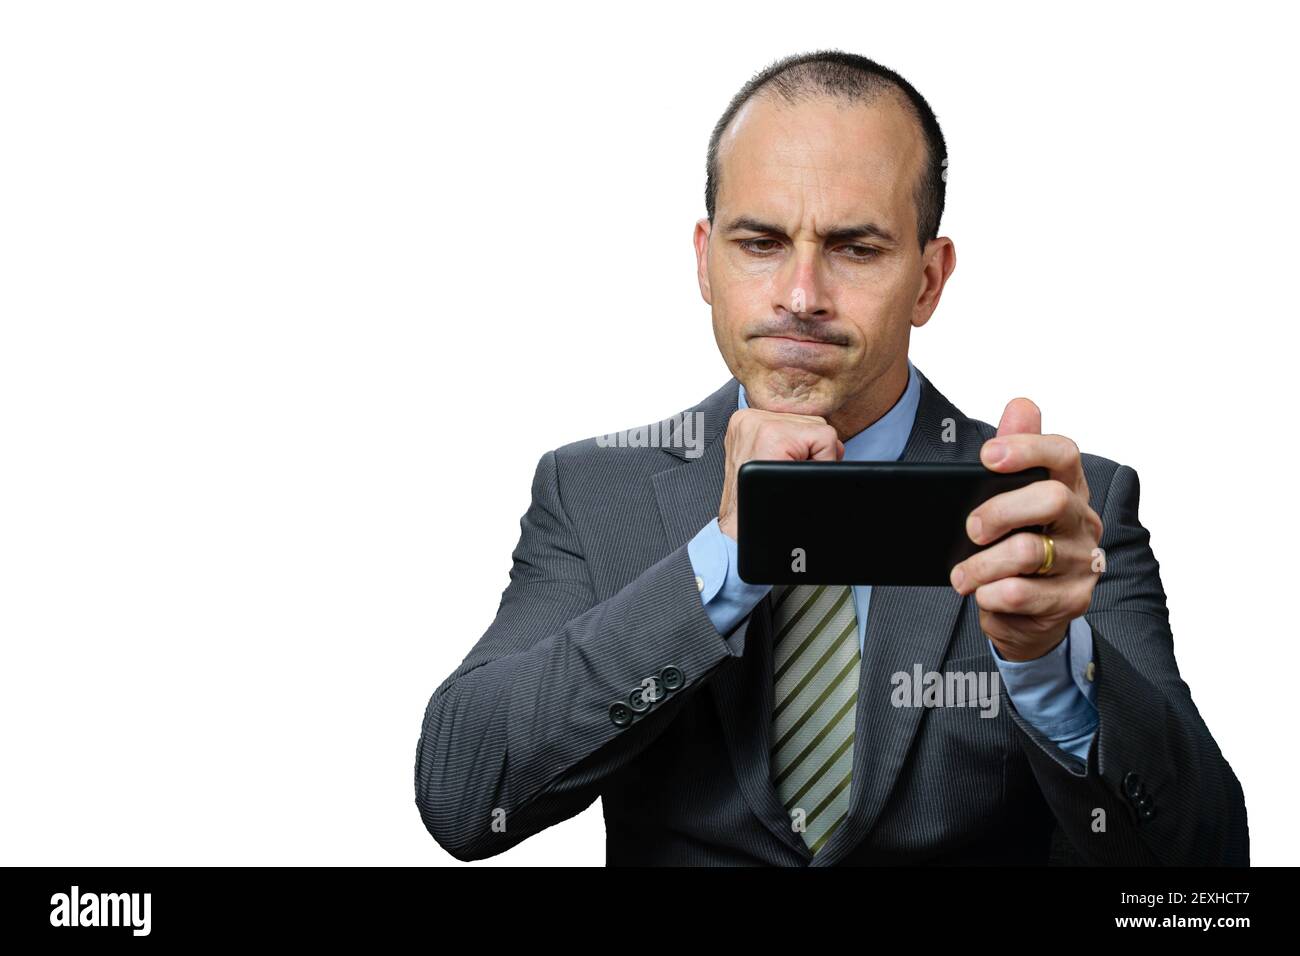 Mature man with suit and tie, looking at his smartphone, disappointed and with his fist under chin. Stock Photo